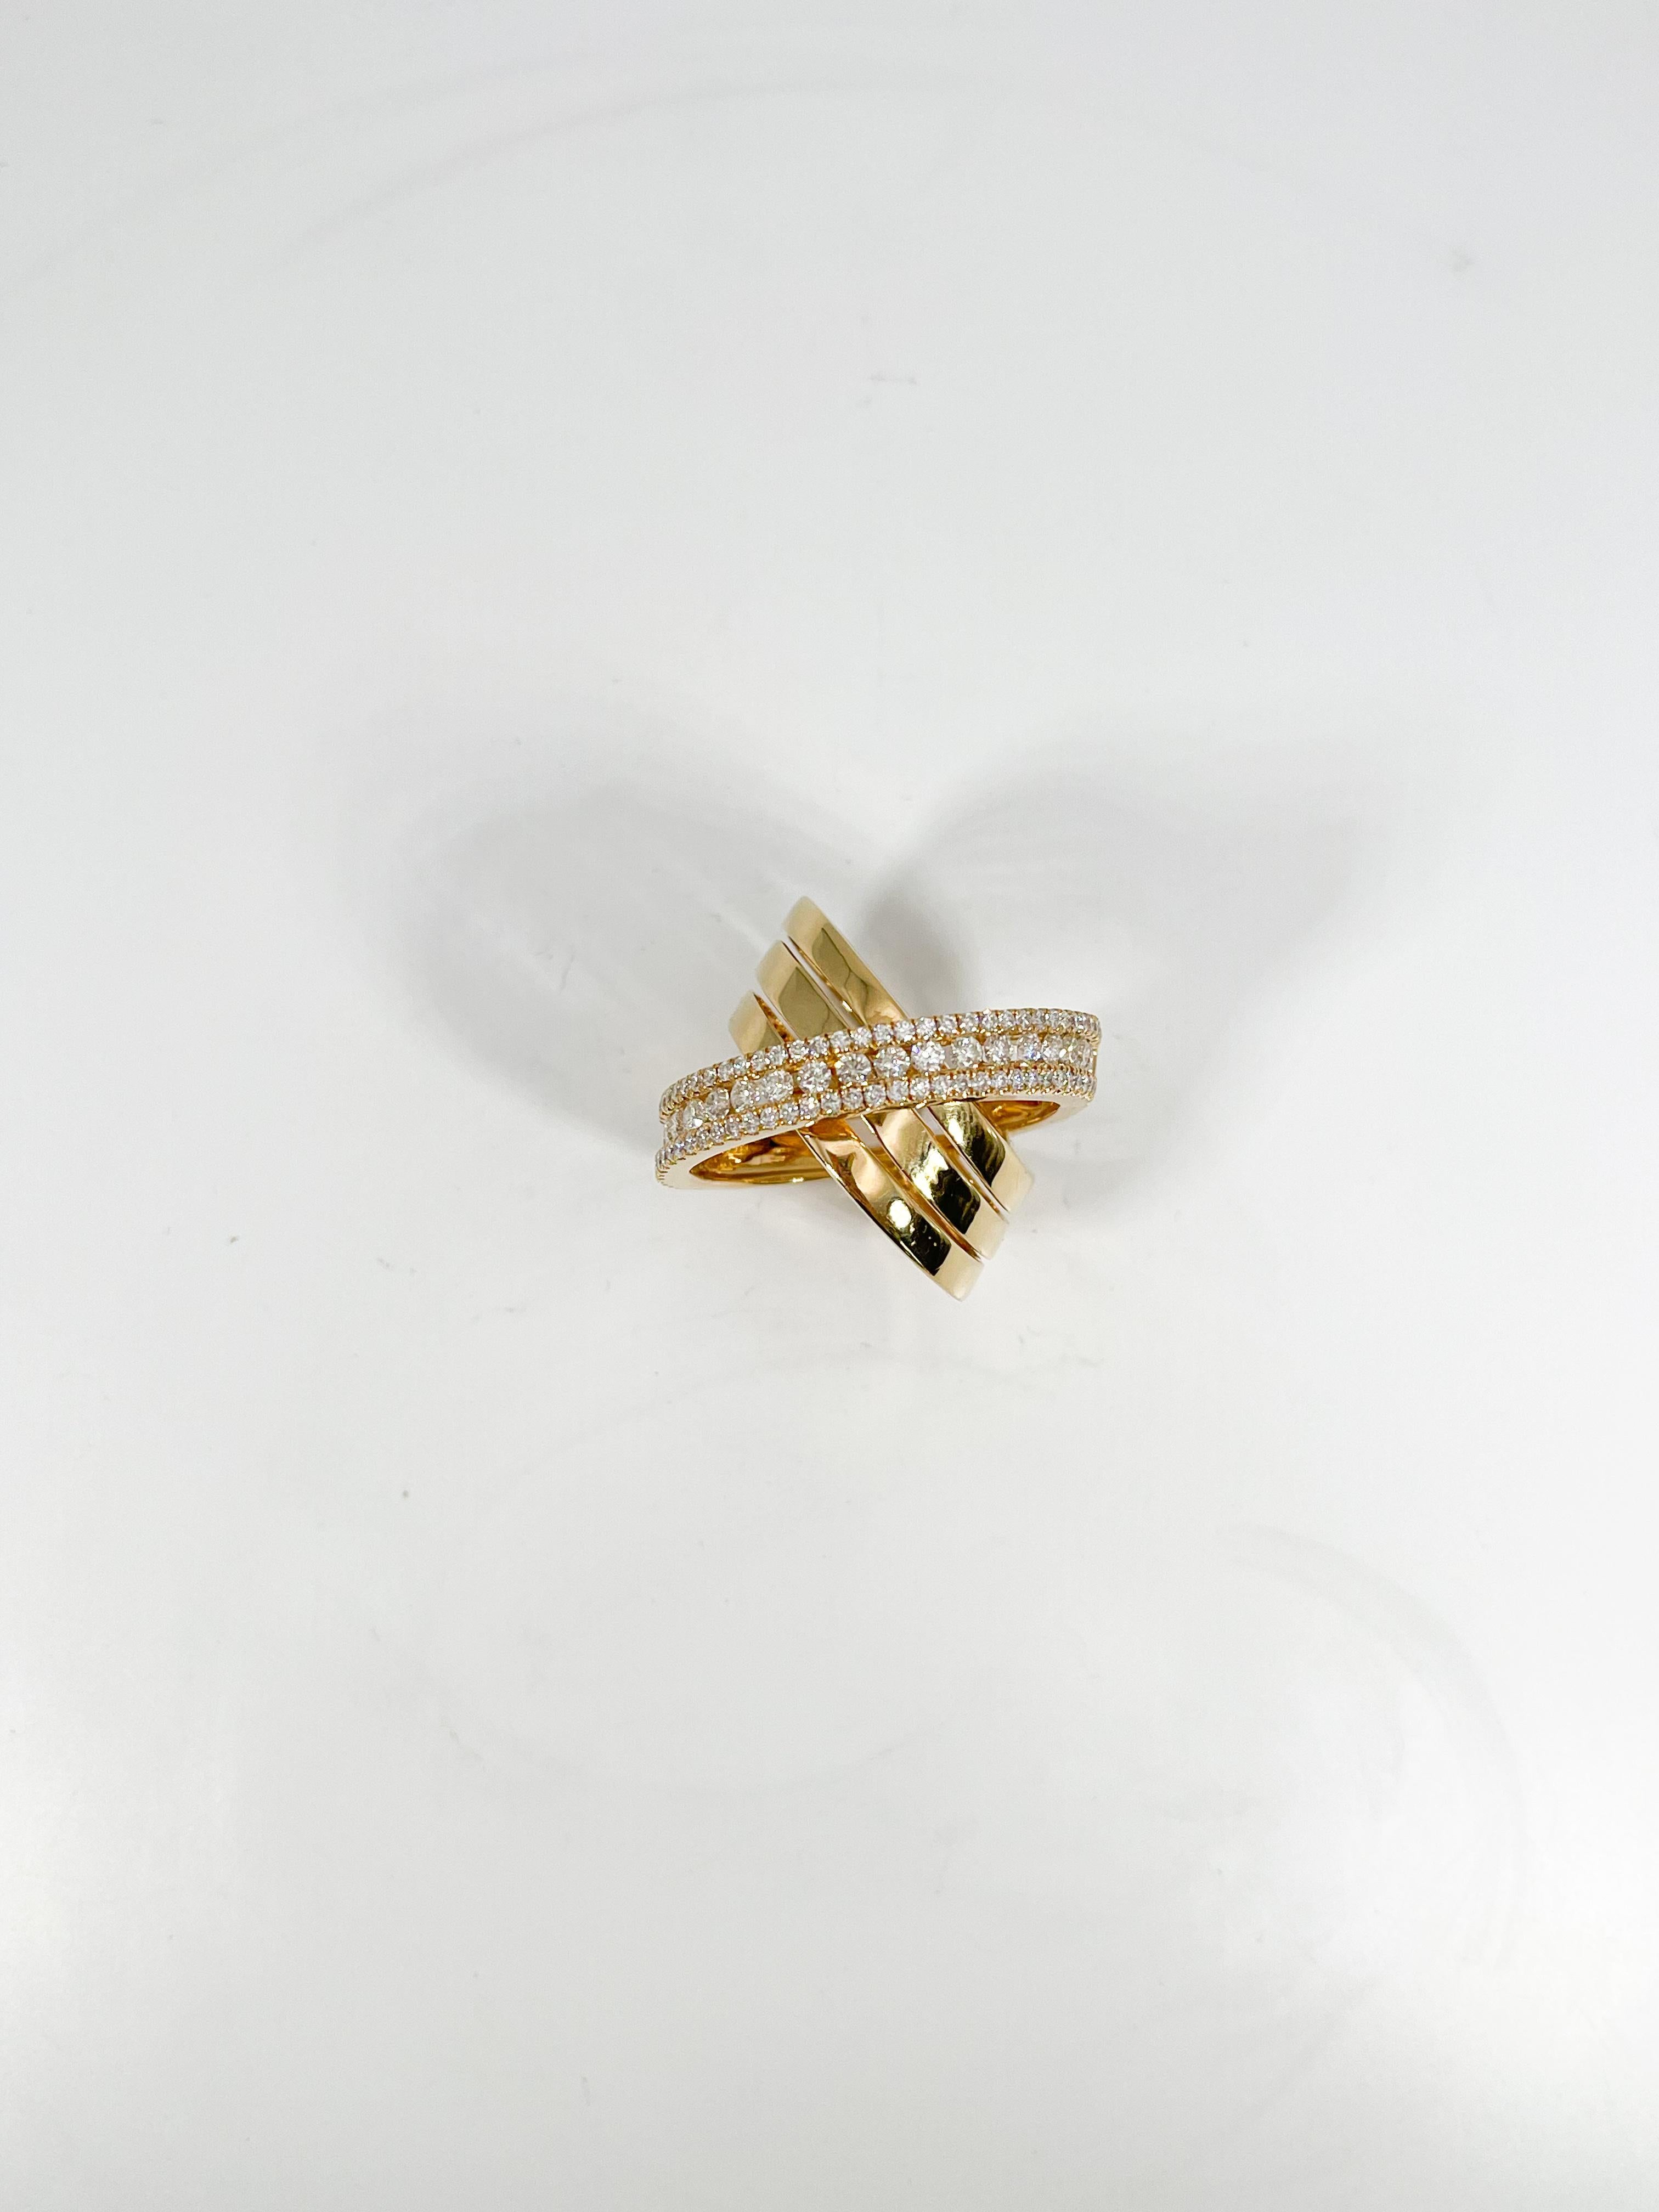 18k yellow gold 1.50 CTW large diamond crossover ring. The diamonds in this ring are all round, the width of the ring is 19.8 mm, the ring size is a 7, and it has a total weight of 14.6 grams.